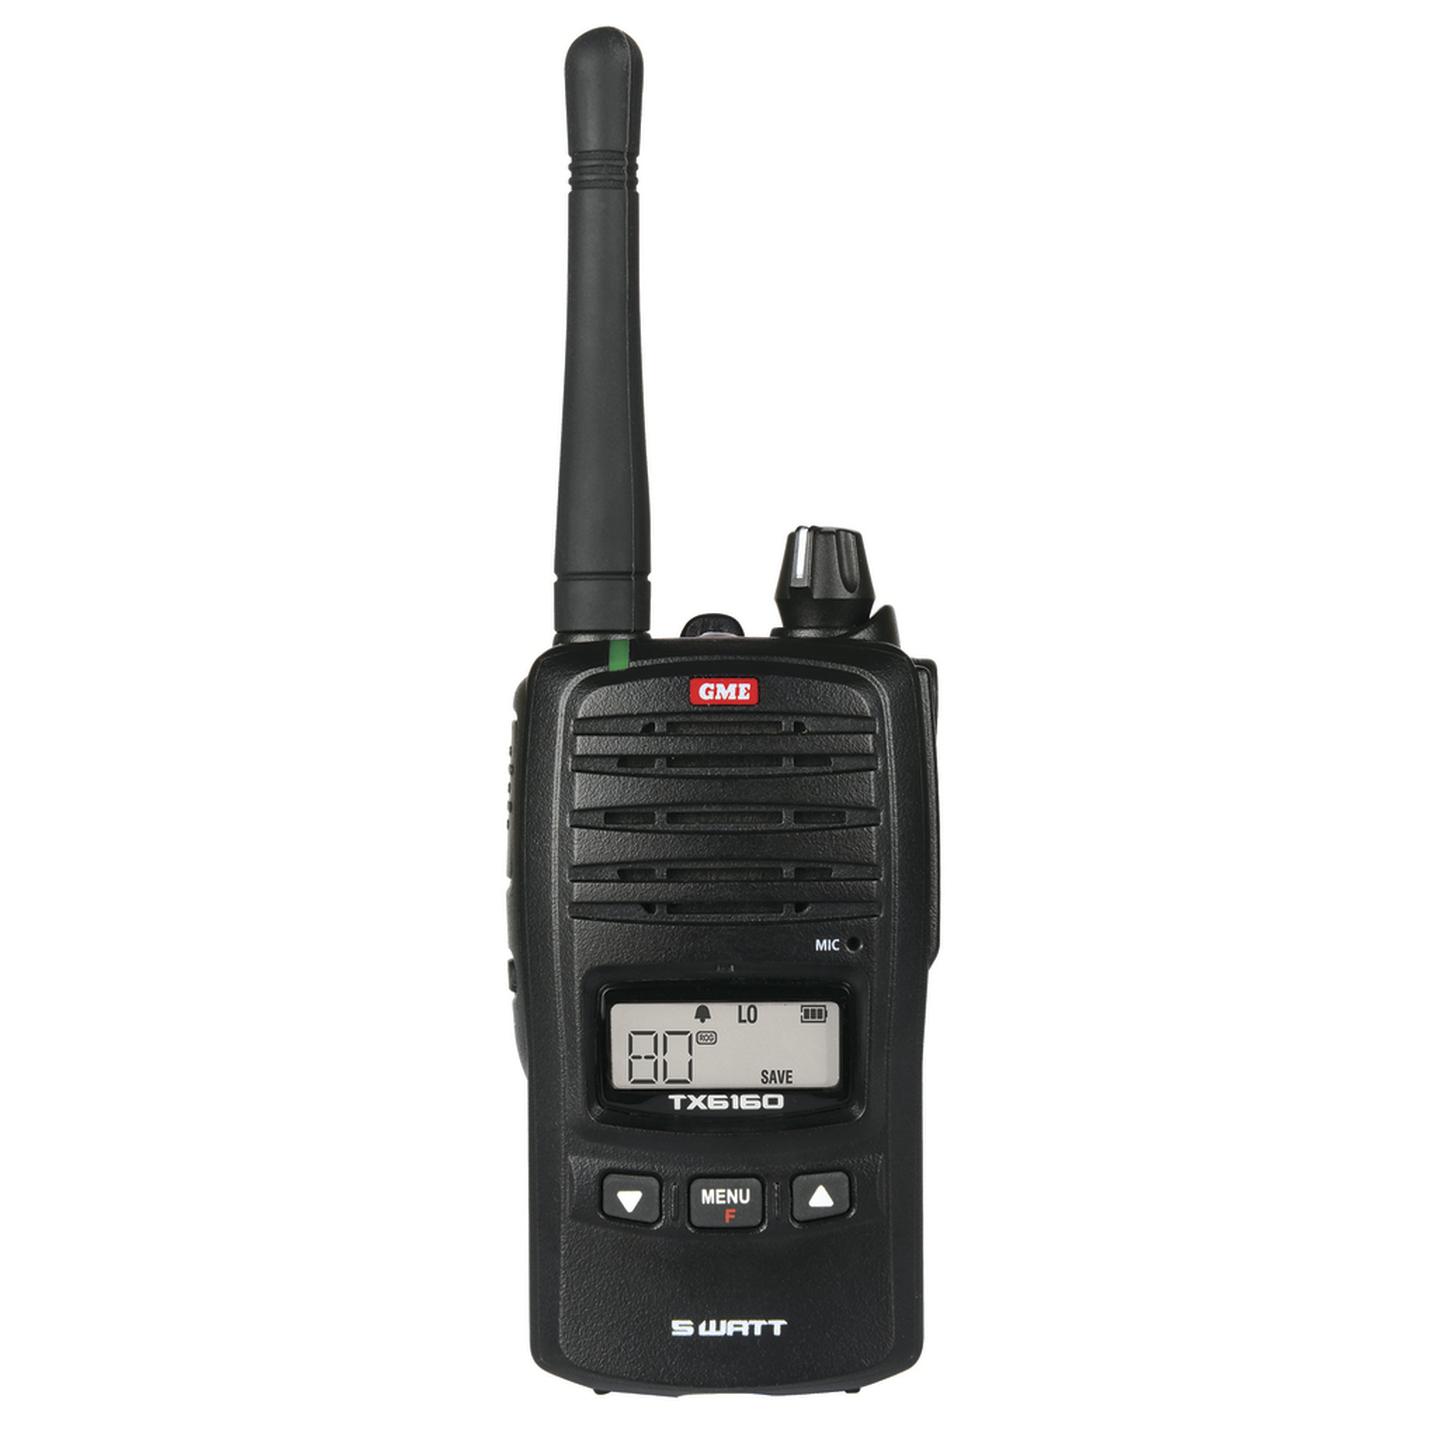 GME 5W UHF Transceiver TX6160 with Accessories